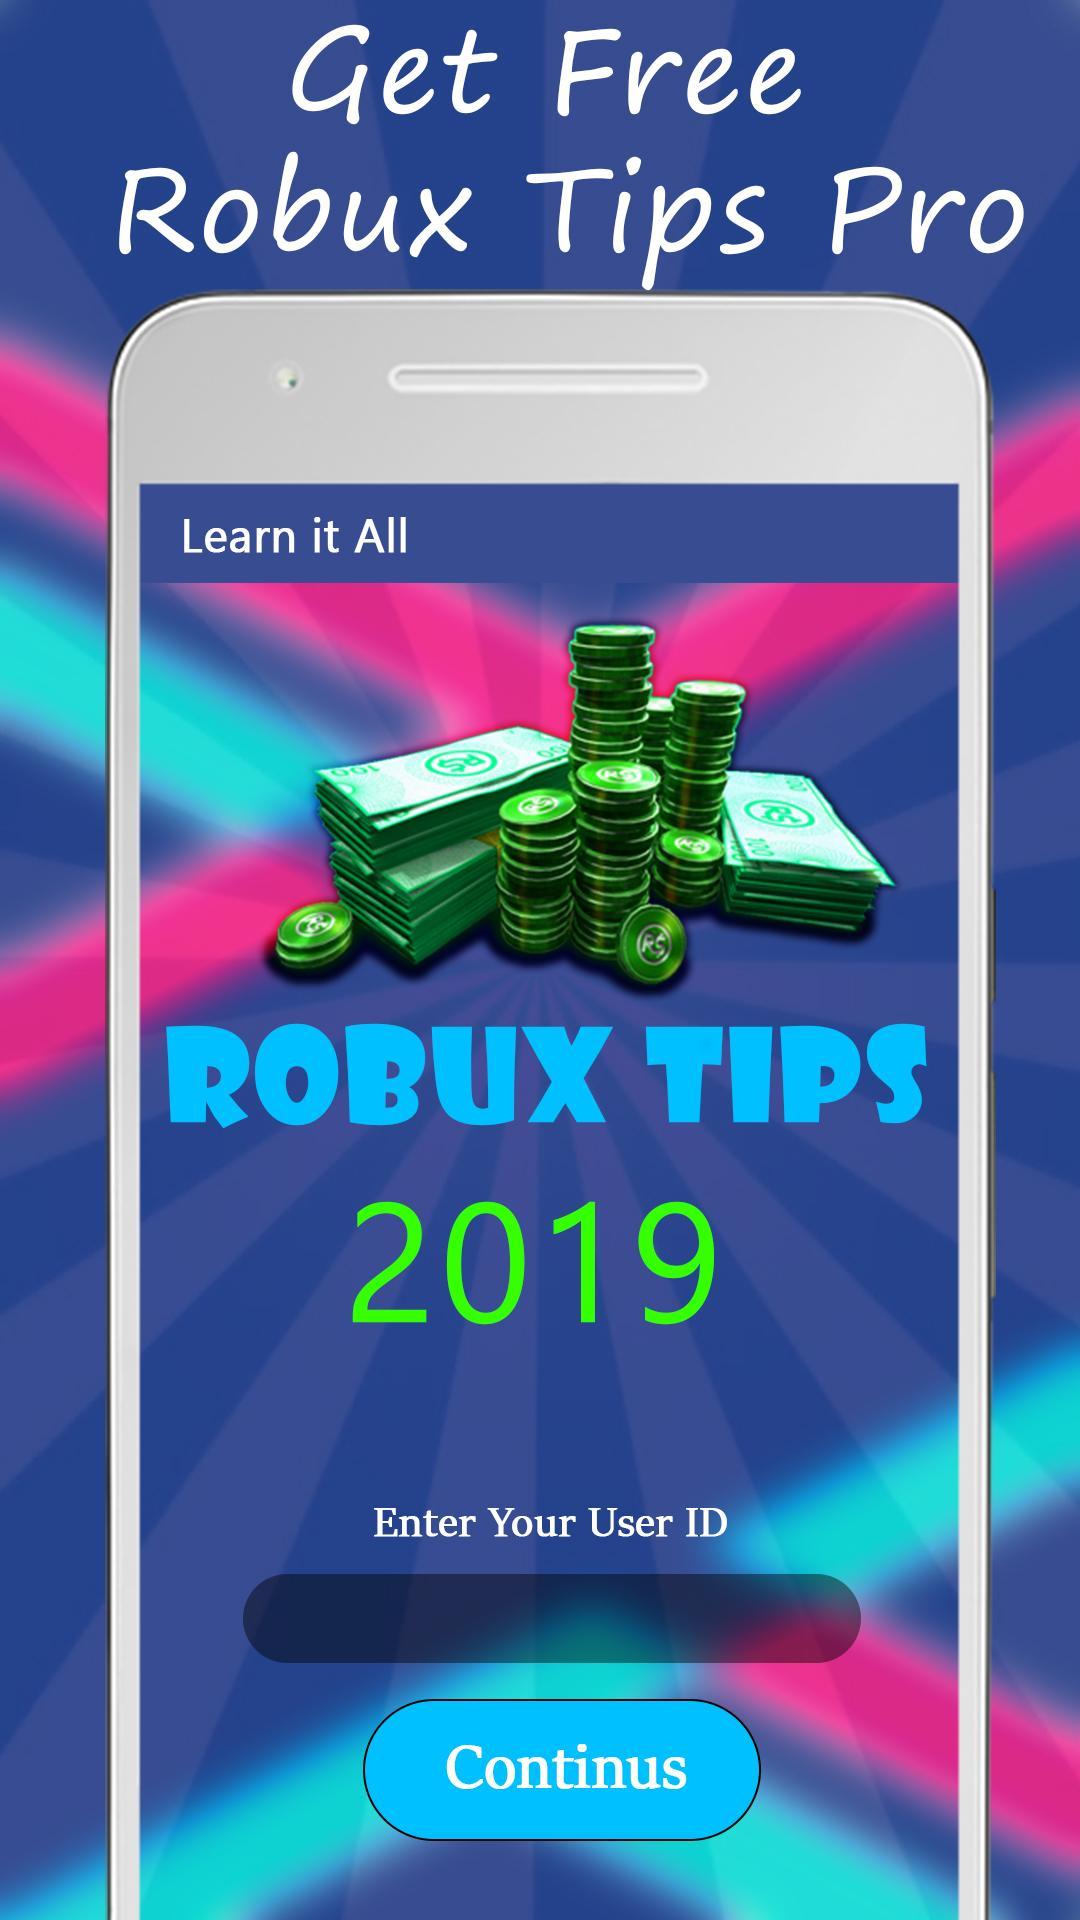 Get New Free Tips Robux For Roblox Guide 2k19 For Android Apk Download - free robux pro tips 2k19 apk download latest android version 1 0